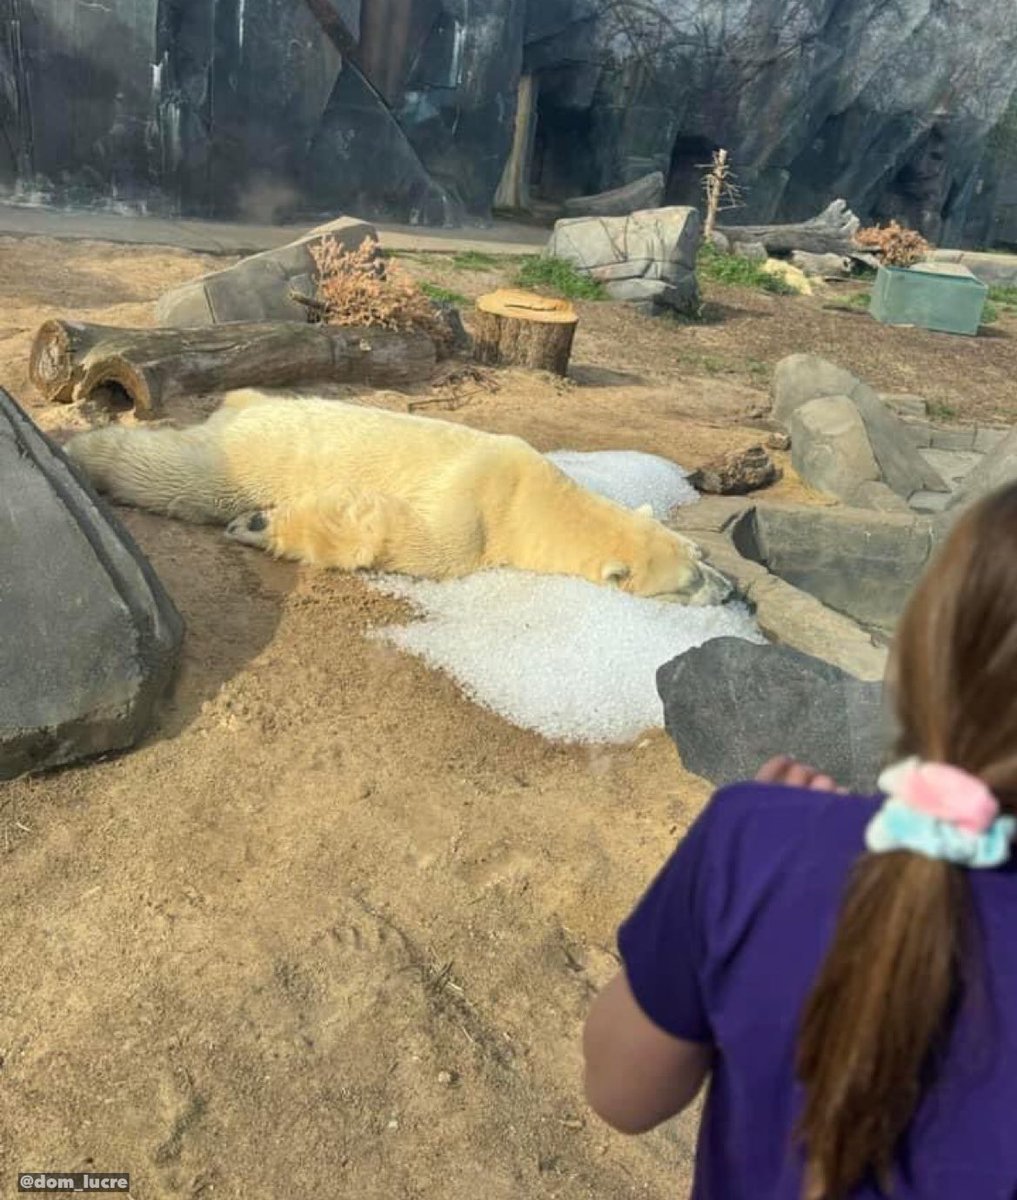 🔥🚨DEVELOPING: People are concerned about the living conditions in the Saint Louis zoo after this photo of a polar bear lying on ice began going viral. A visitor of the zoo took this photo yesterday and began to raise concerns.